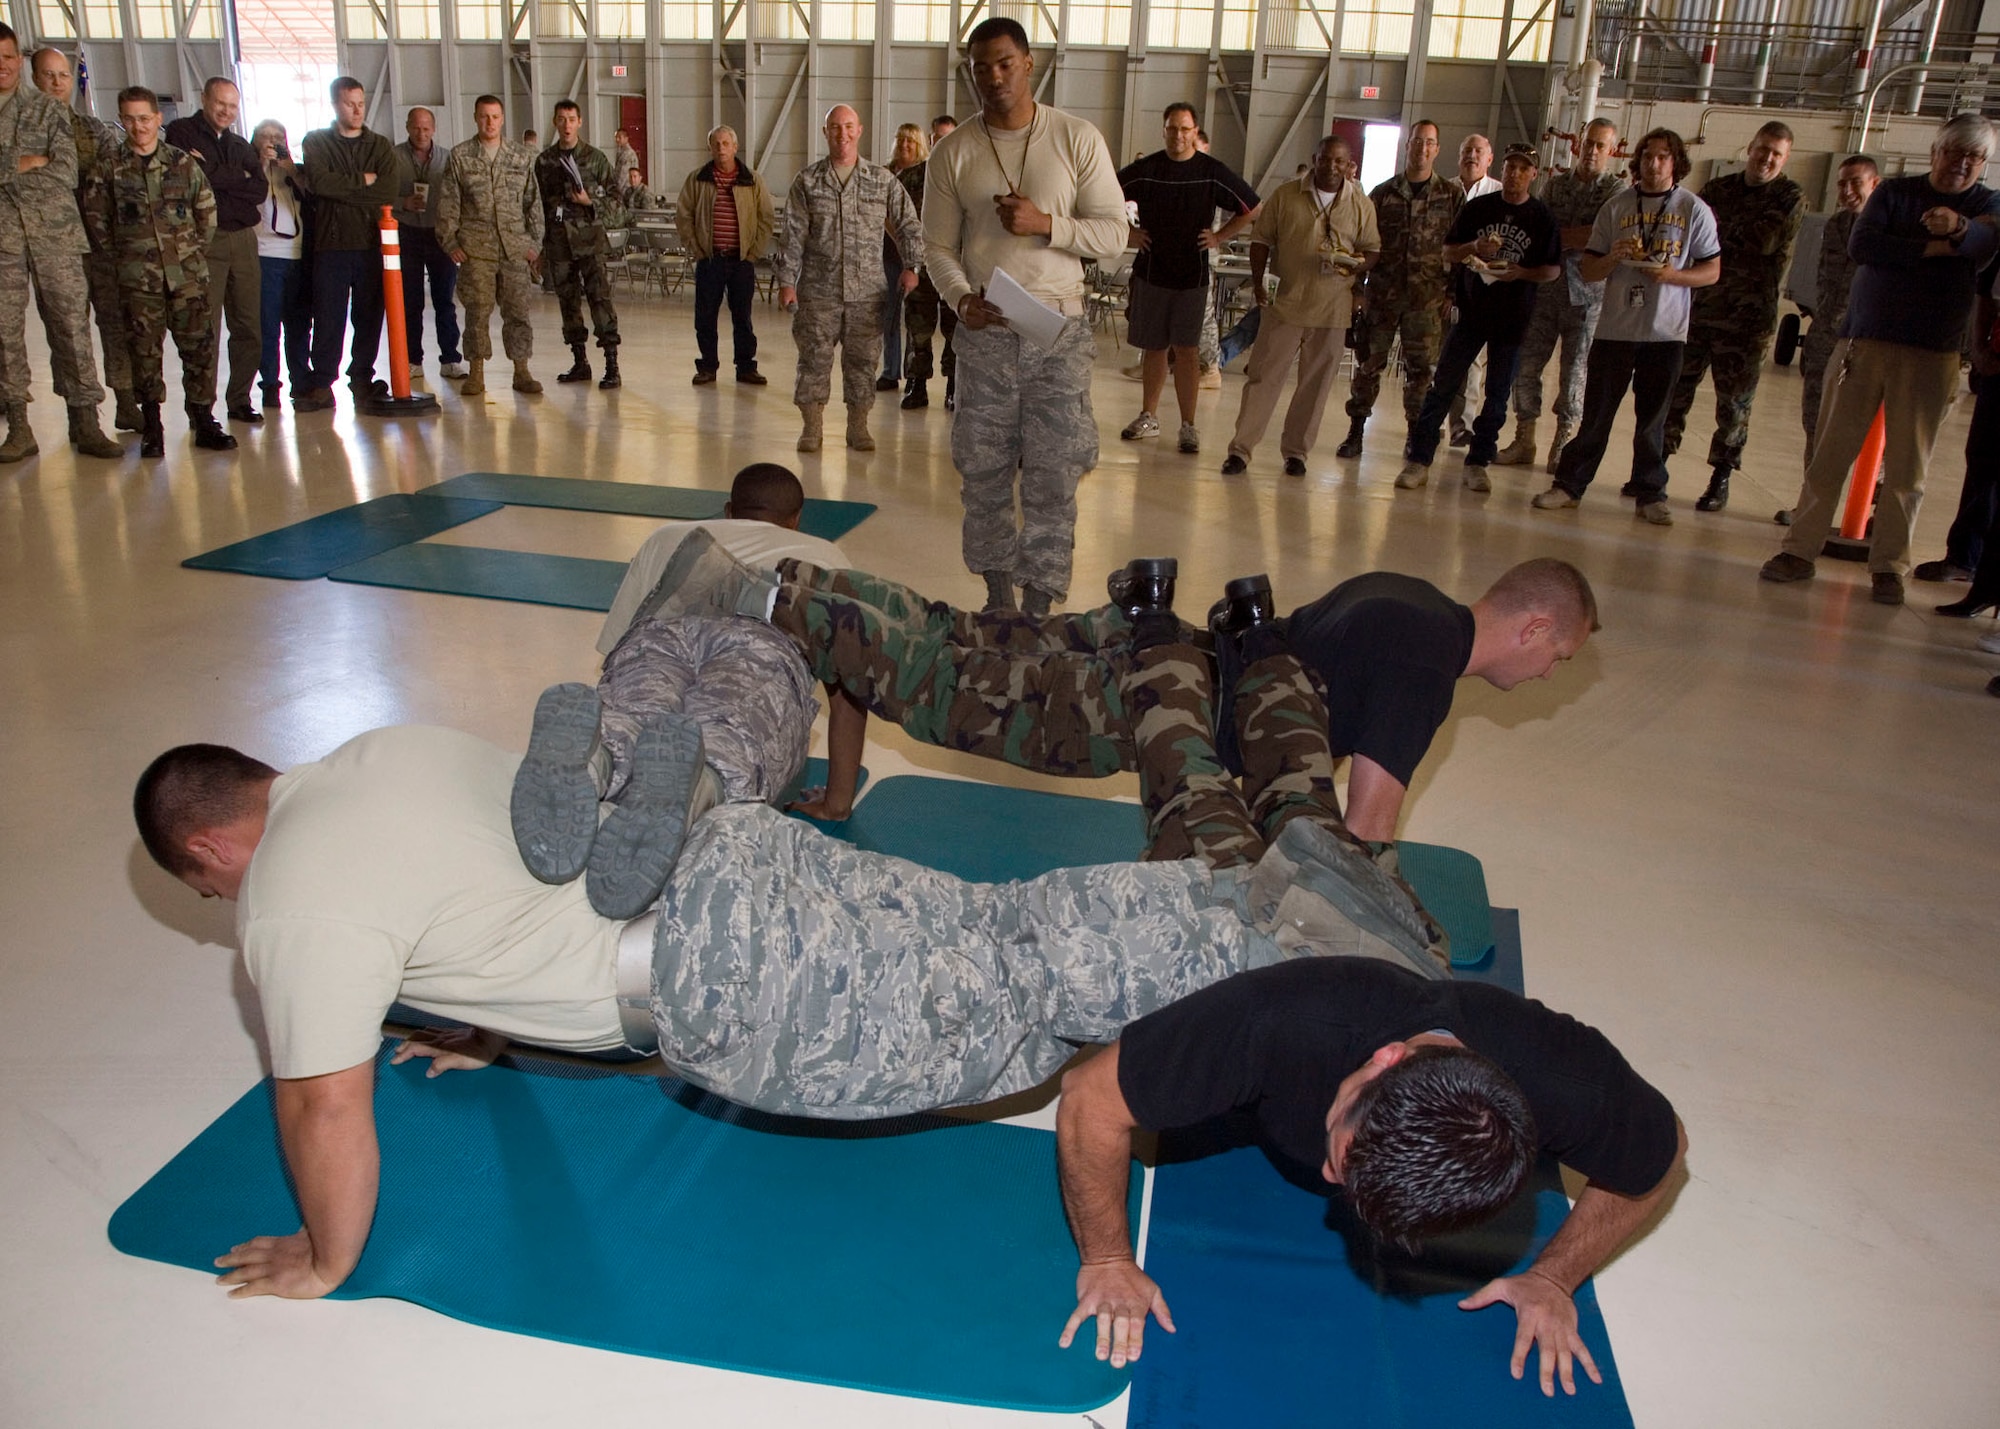 Maintainers perform team push-ups as part of the 412th Maintenance Group's first Maintenance Olympics at hangar 1600 Nov. 7. This was part of 412th MXG's and 31st Test and Evaluation Squadron's Wingman Day event. (Air Force photo by Chad Bellay)